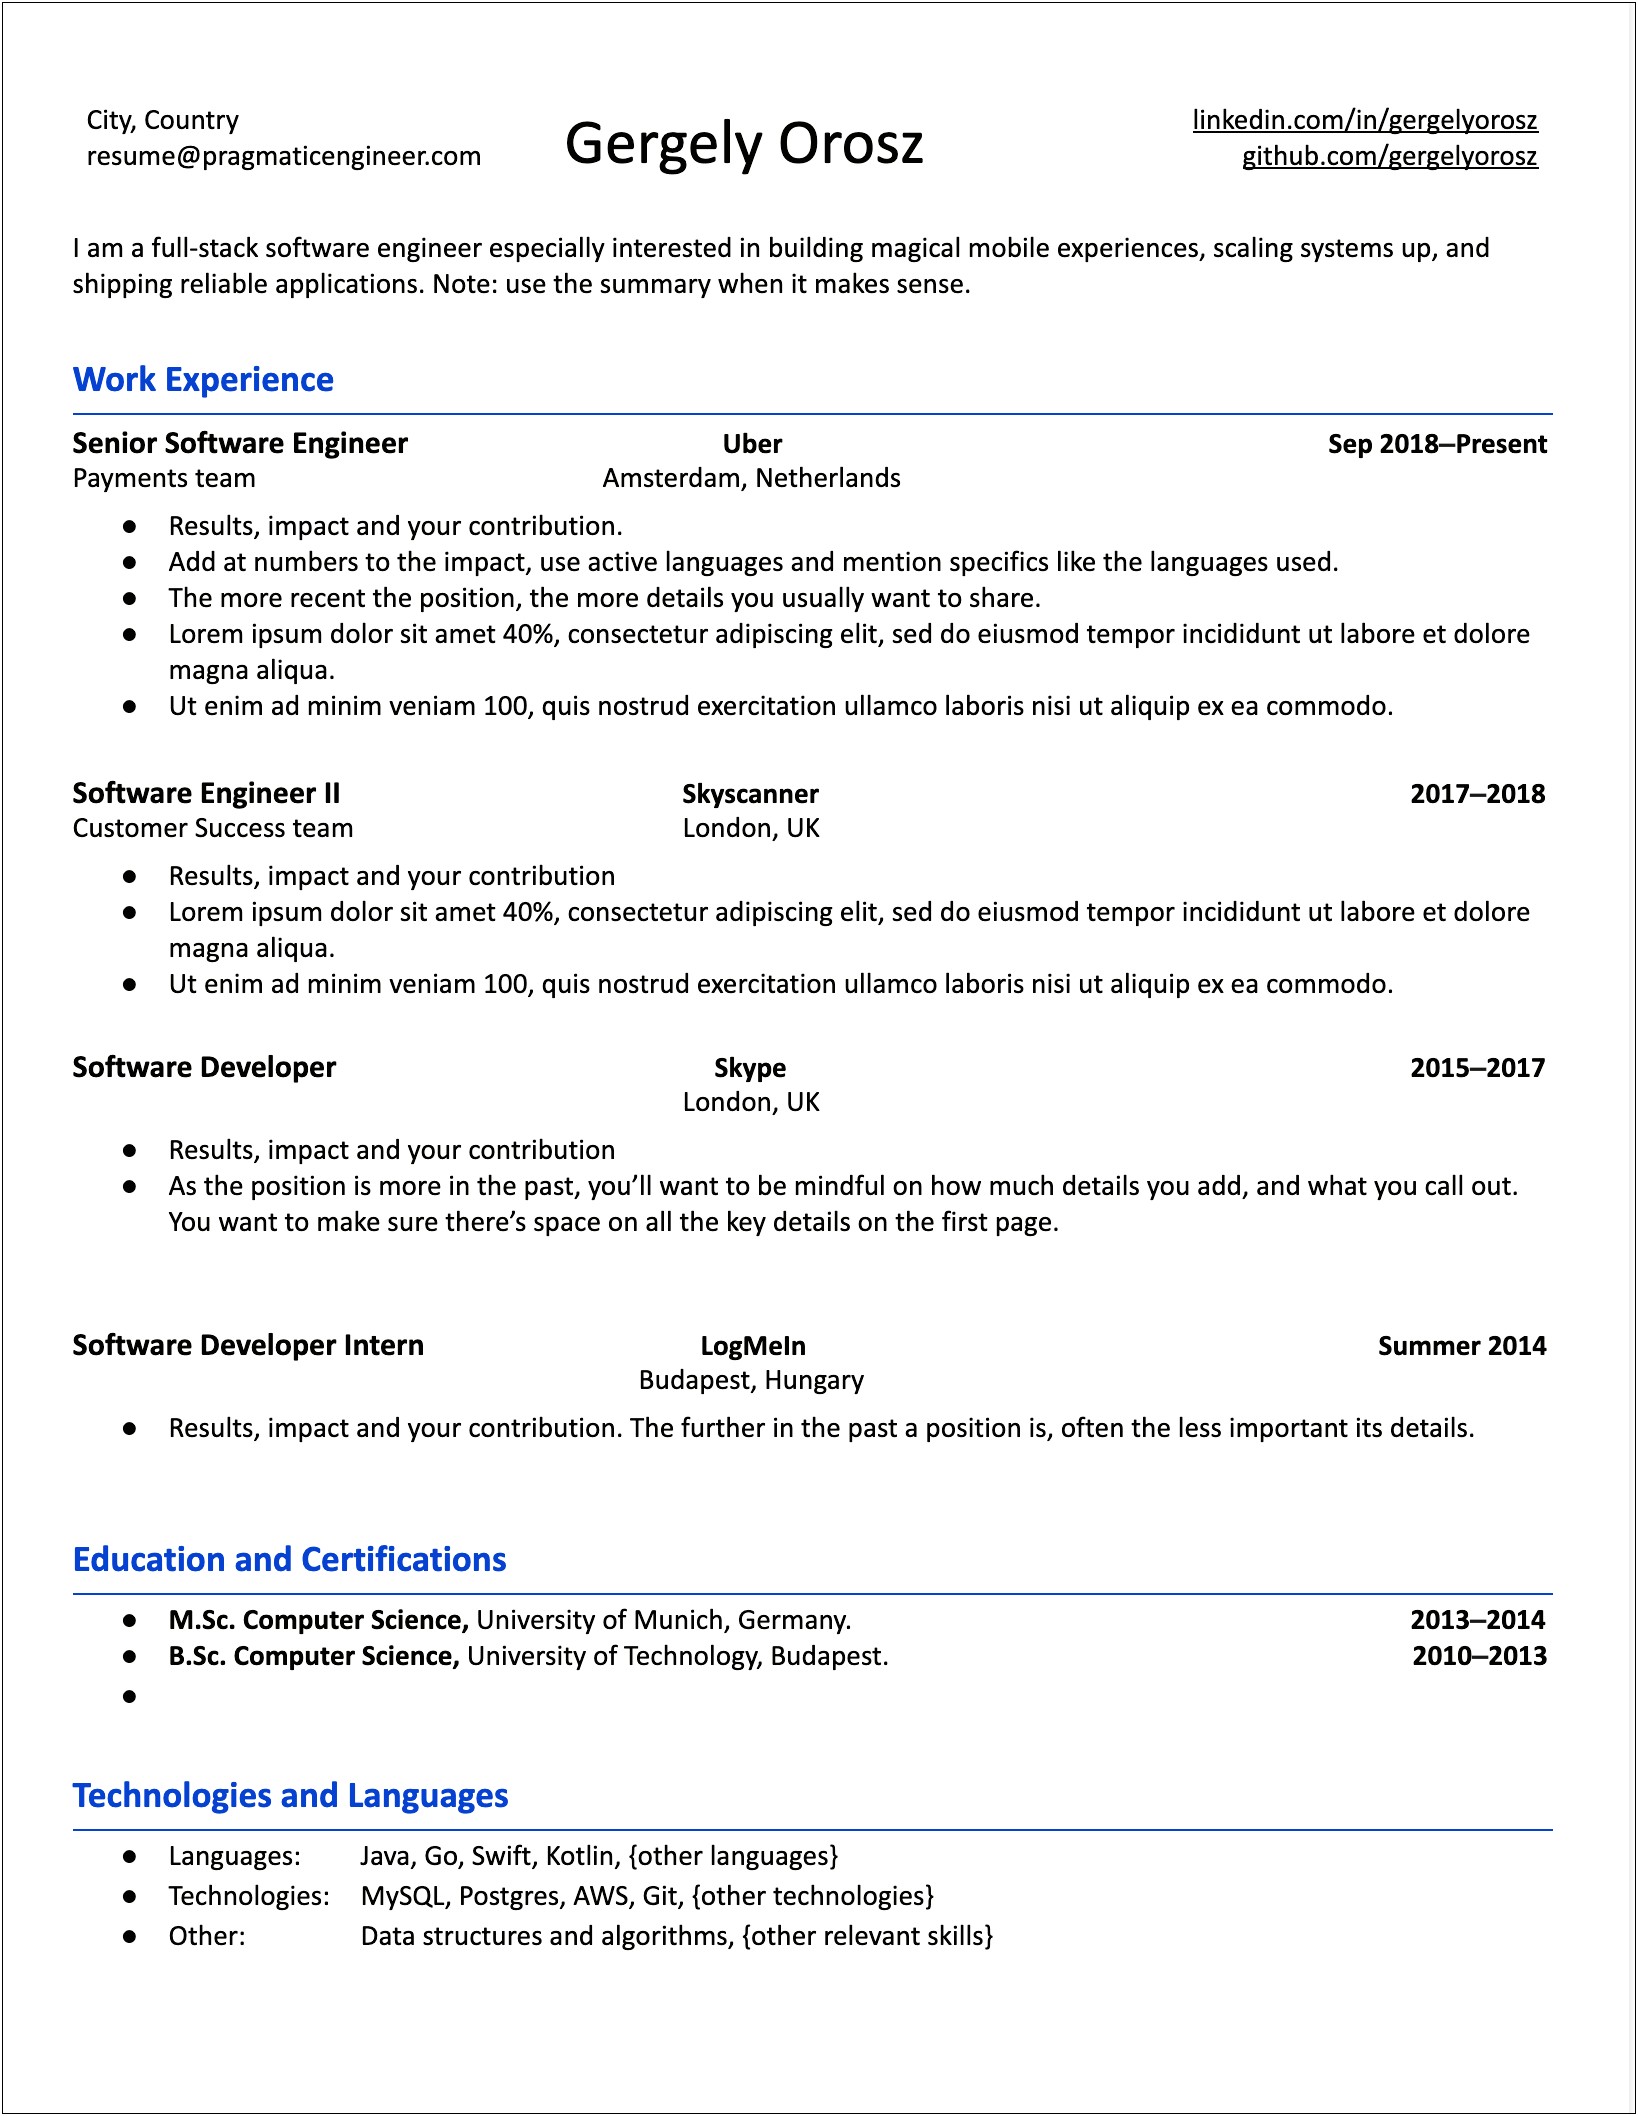 Resume Samples For Computer Science Engineers